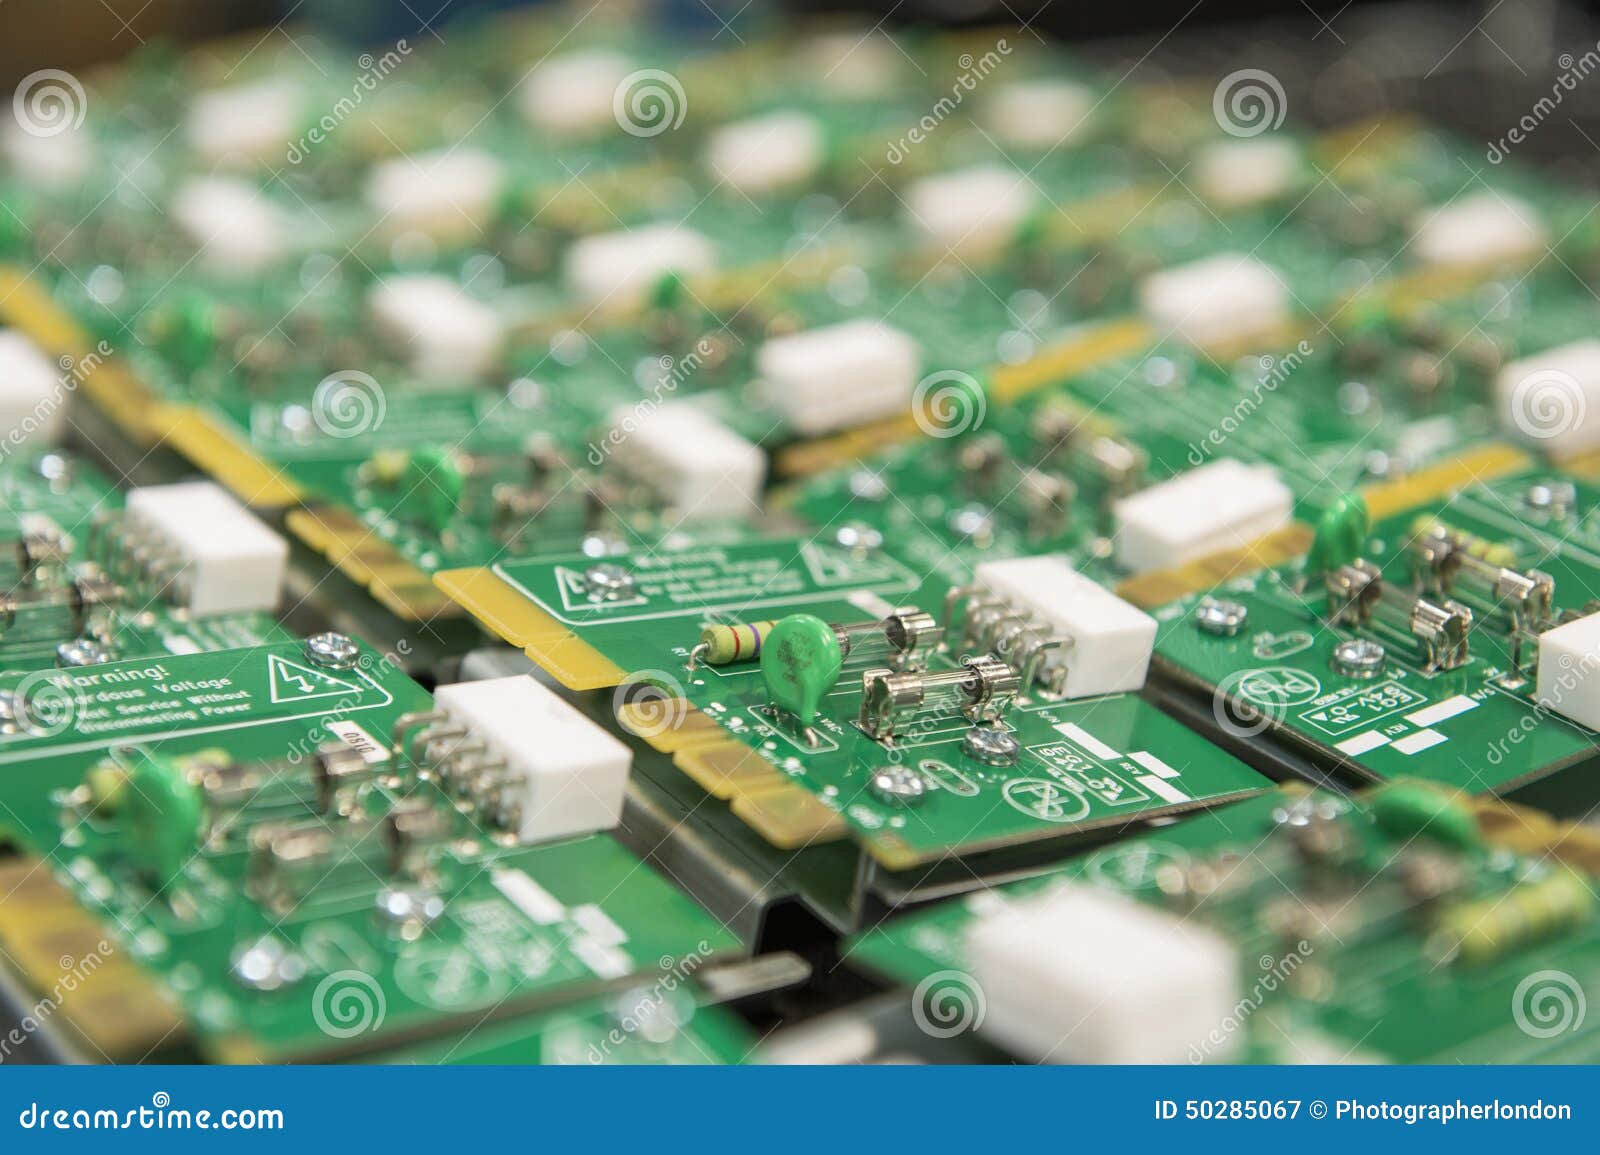 close-up of circuit board in electronics industry